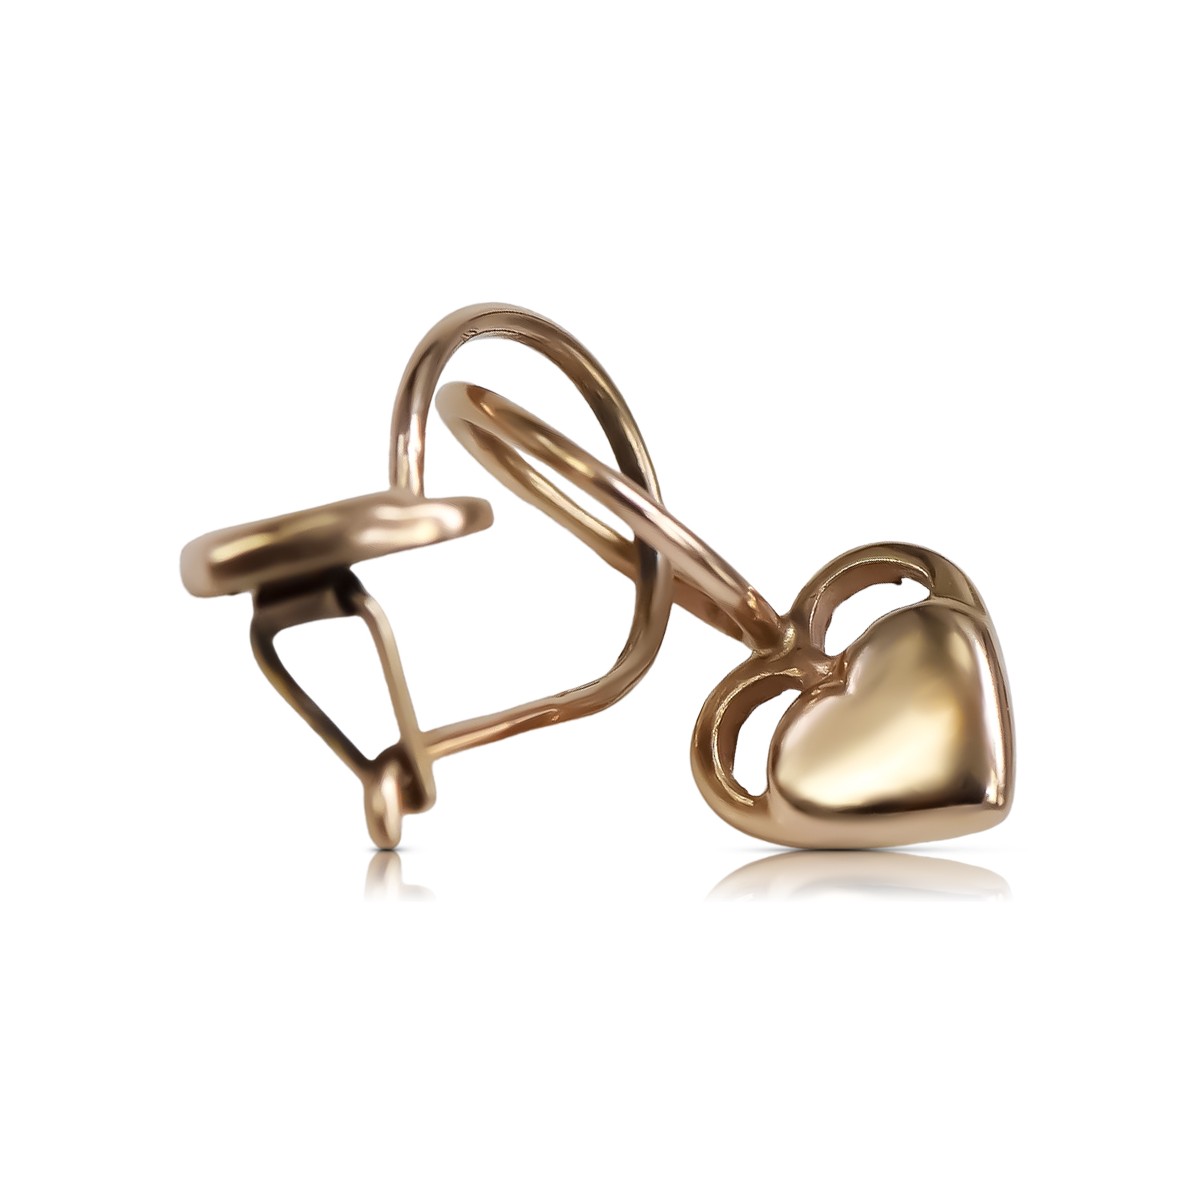 "Classic 14K 585 Rose Pink Gold Heart Earrings from the Vintage Collection" ven212